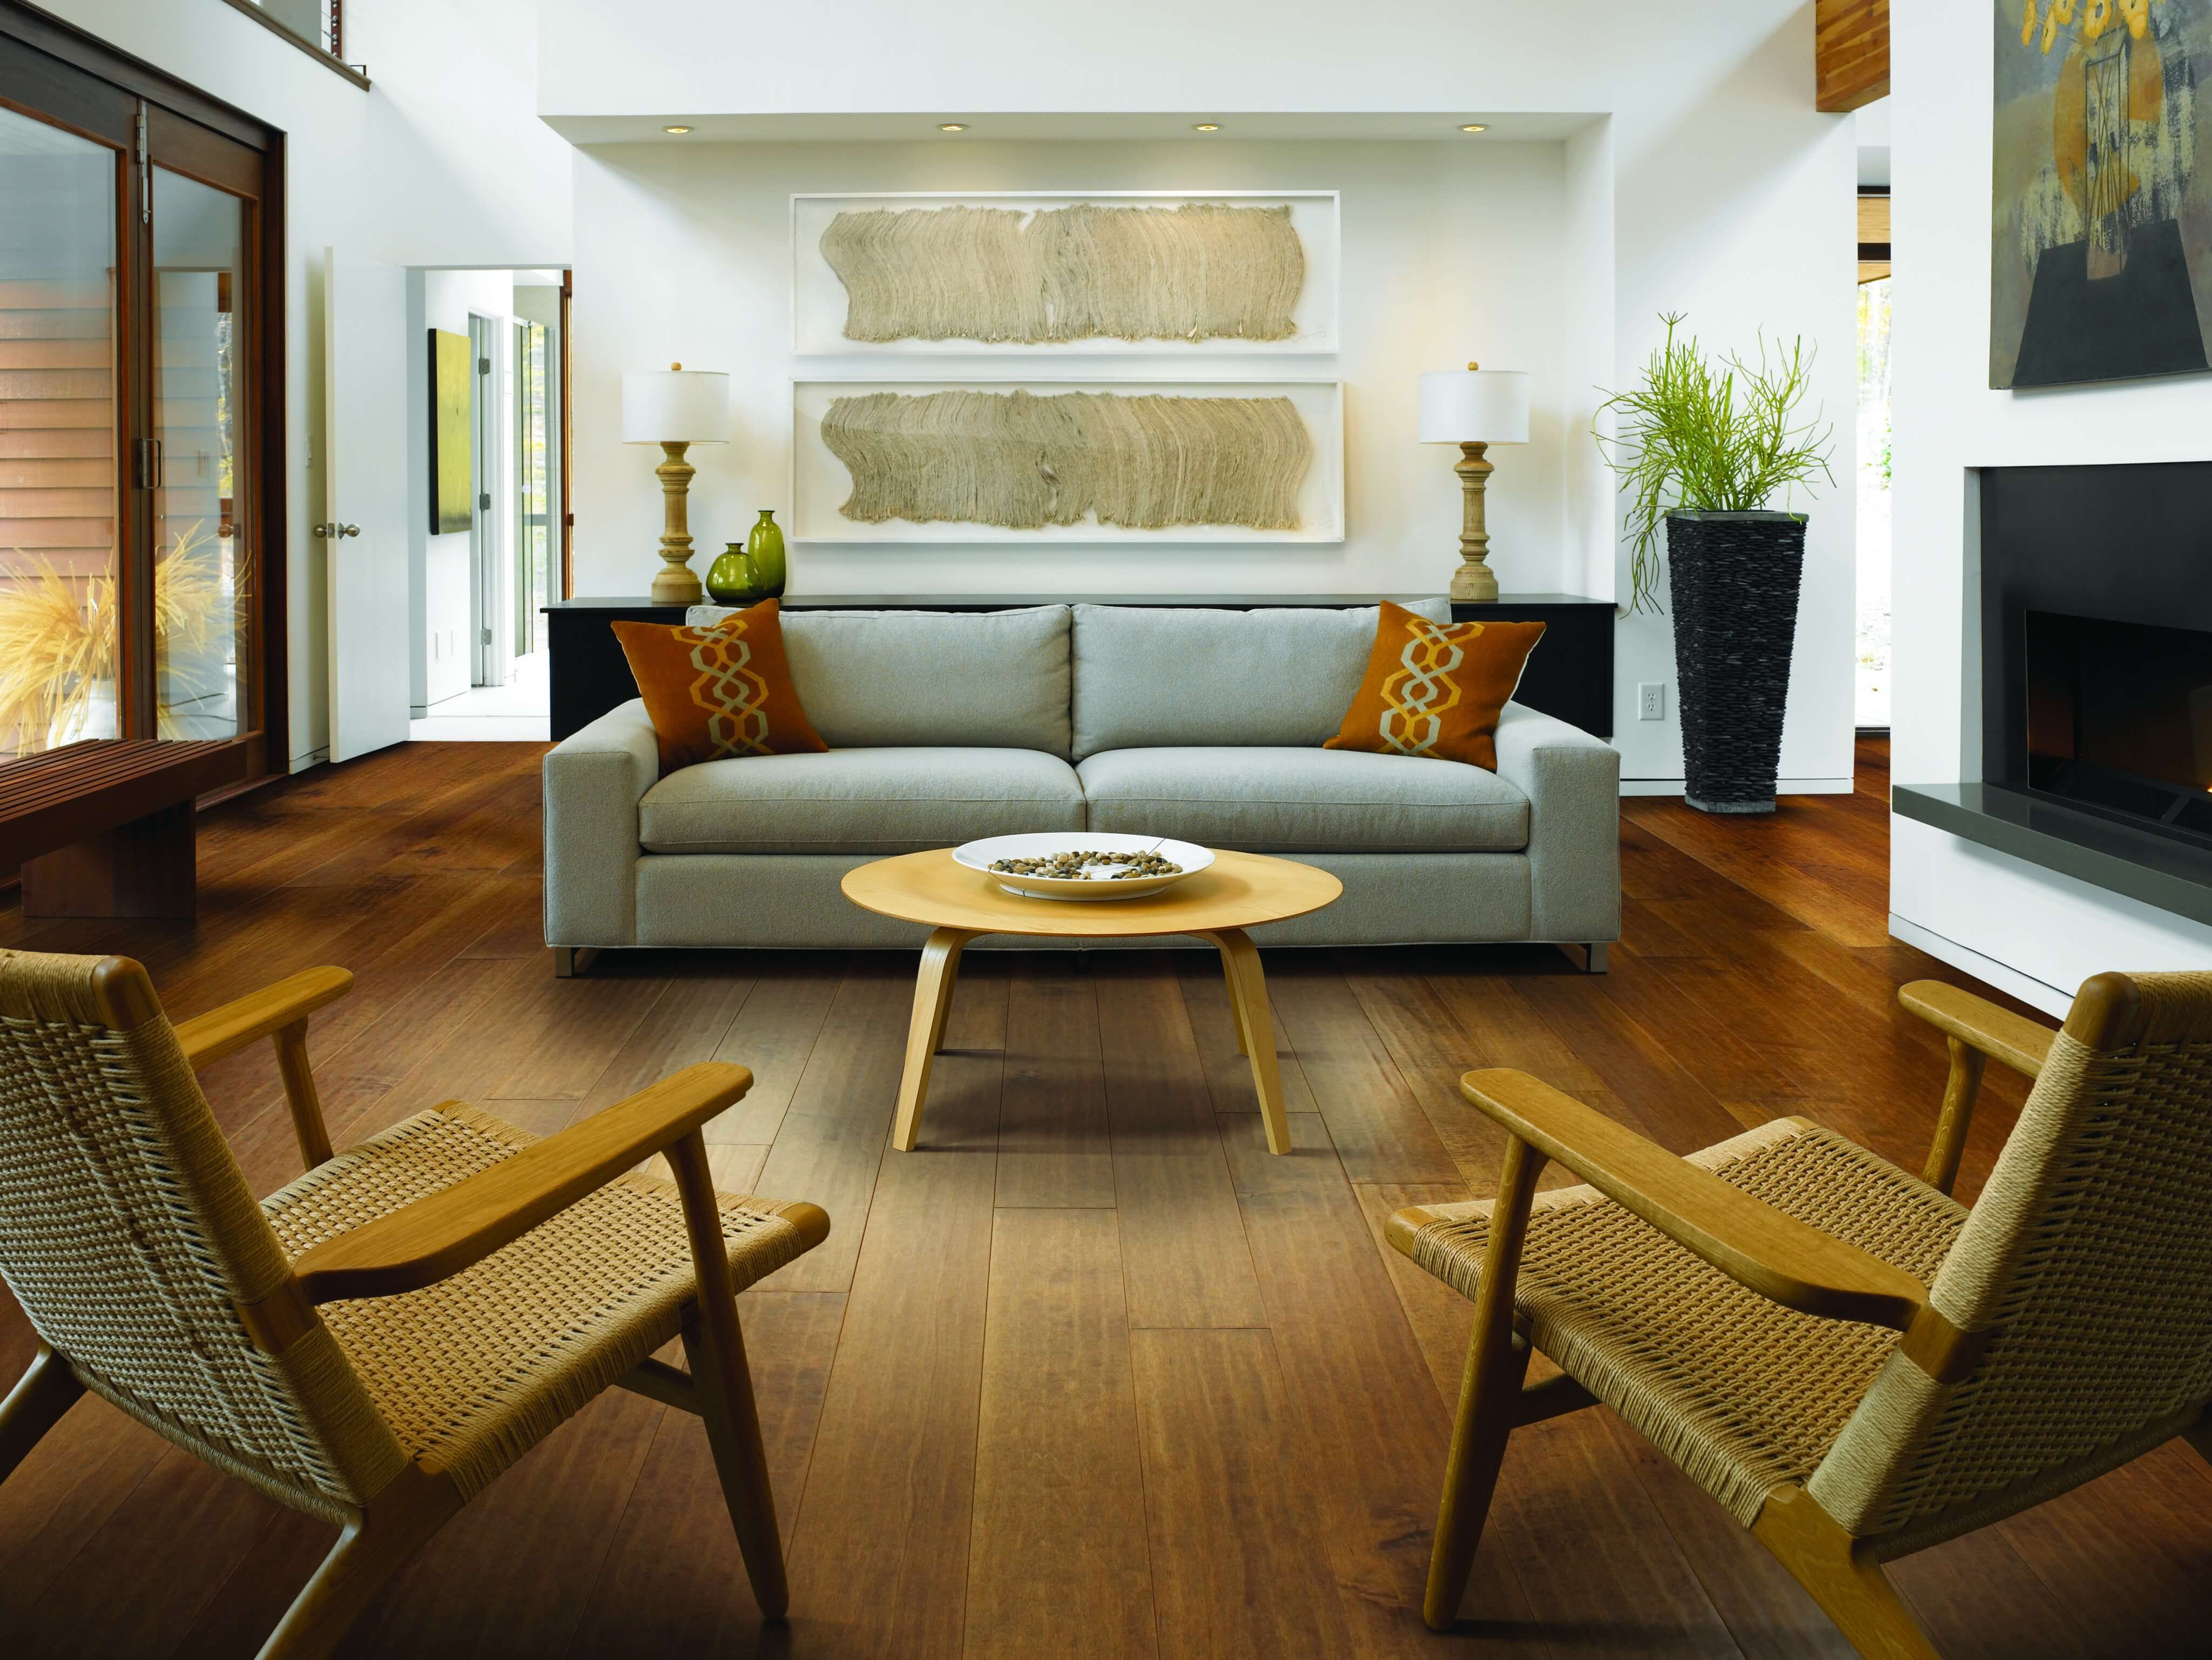 Why does Your Engineered Hardwood Flooring Have Gaps?